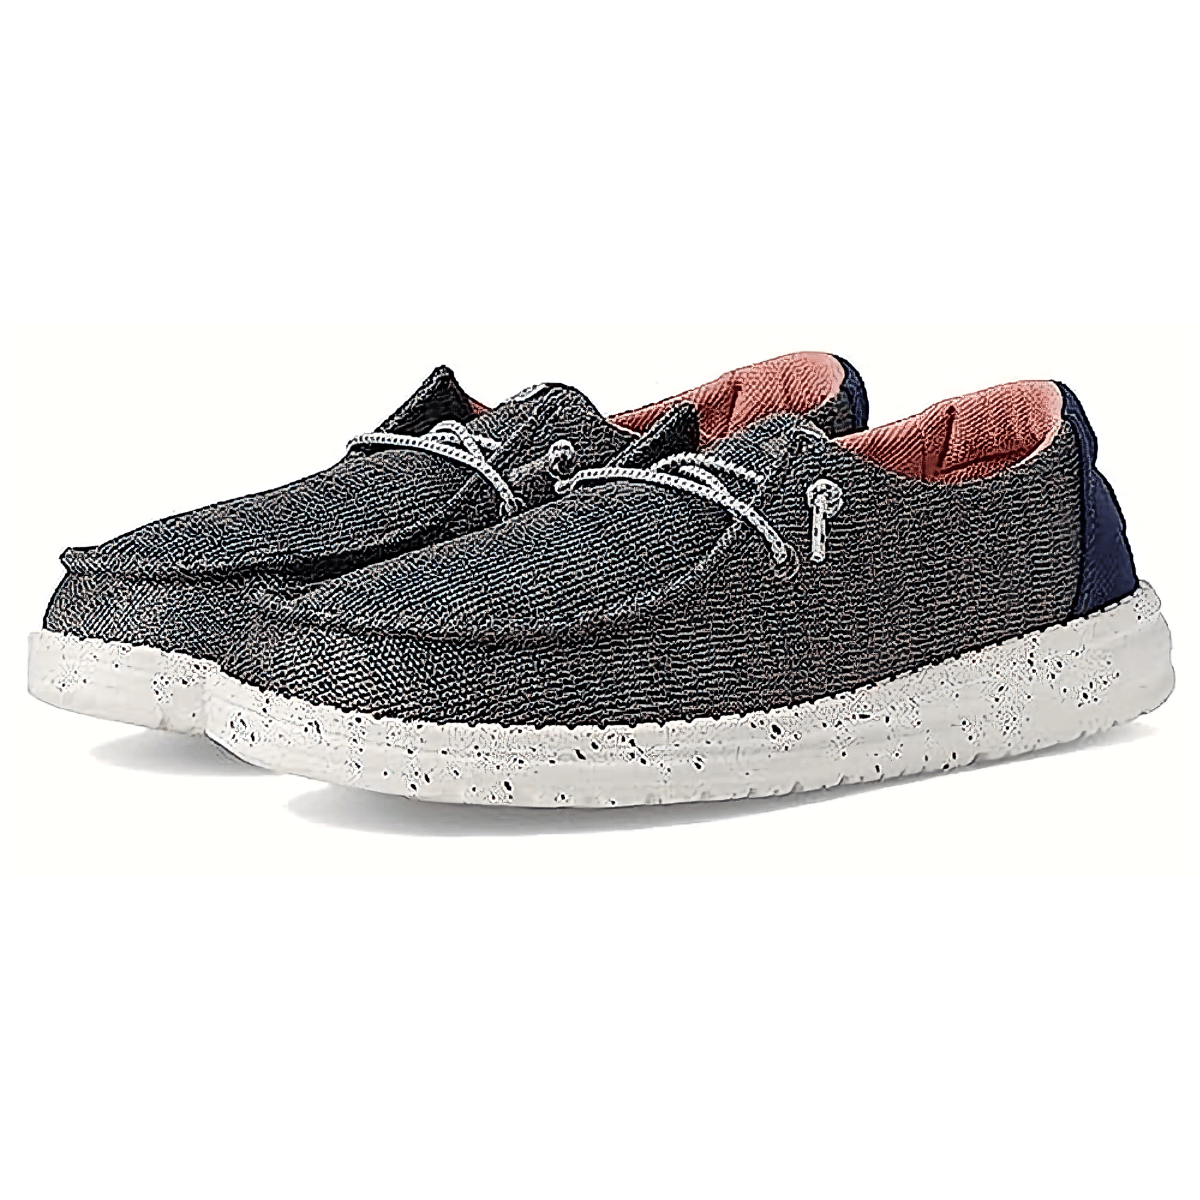 Wally Sport Mesh Navy - Men's Casual Shoes